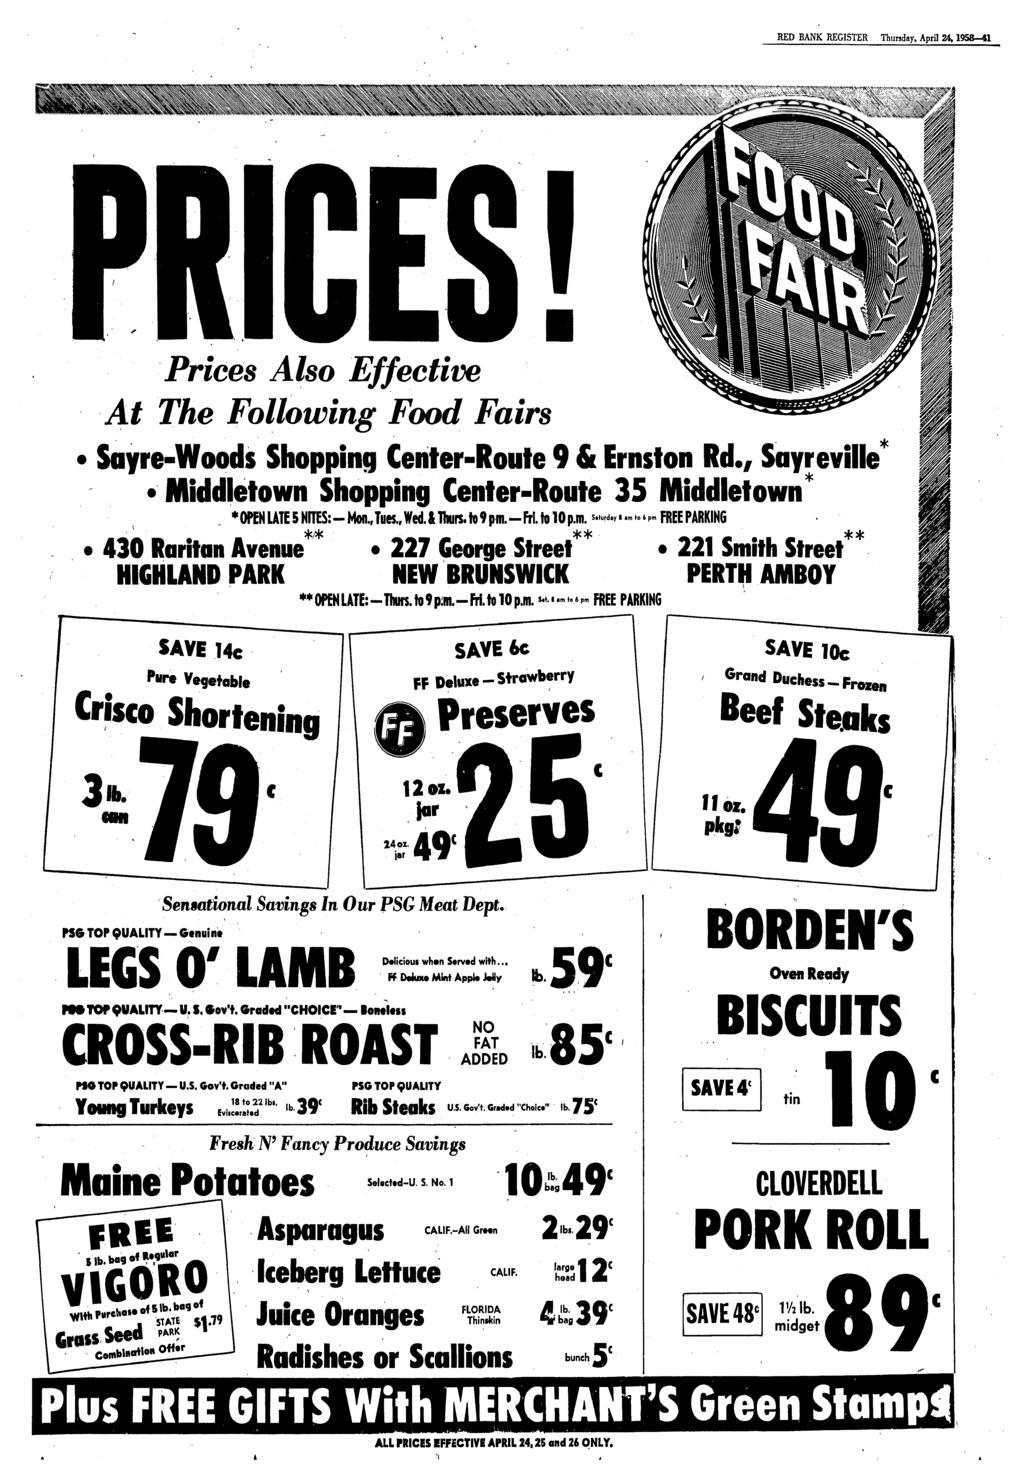 REGISTER Thursday, April 24,1958-41 Prices Also Effective At The Following Food Fairs Sayre-Woods Shopping Center-Route 9 & Ernston Rd., Sayreville Middletown Shopping Center-Route 35 Middletown*.